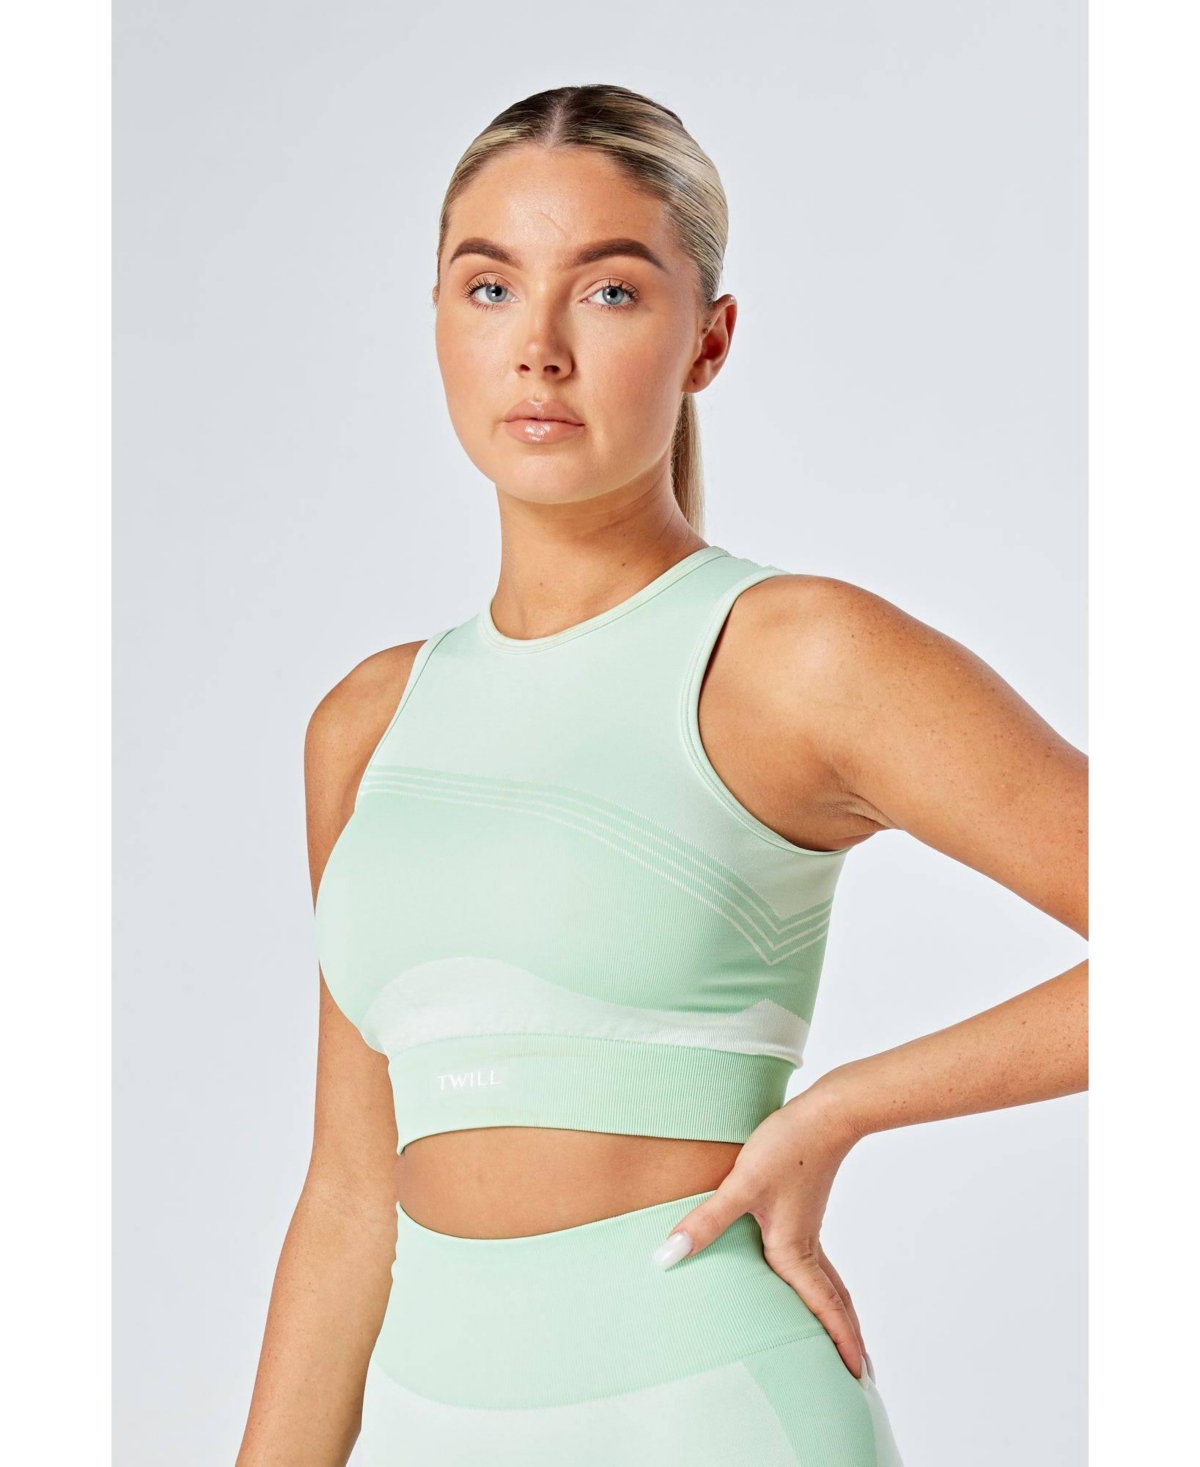 TWILL ACTIVE WOMEN'S RECYCLED COLOUR BLOCK BODY FIT RACER CROP TOP